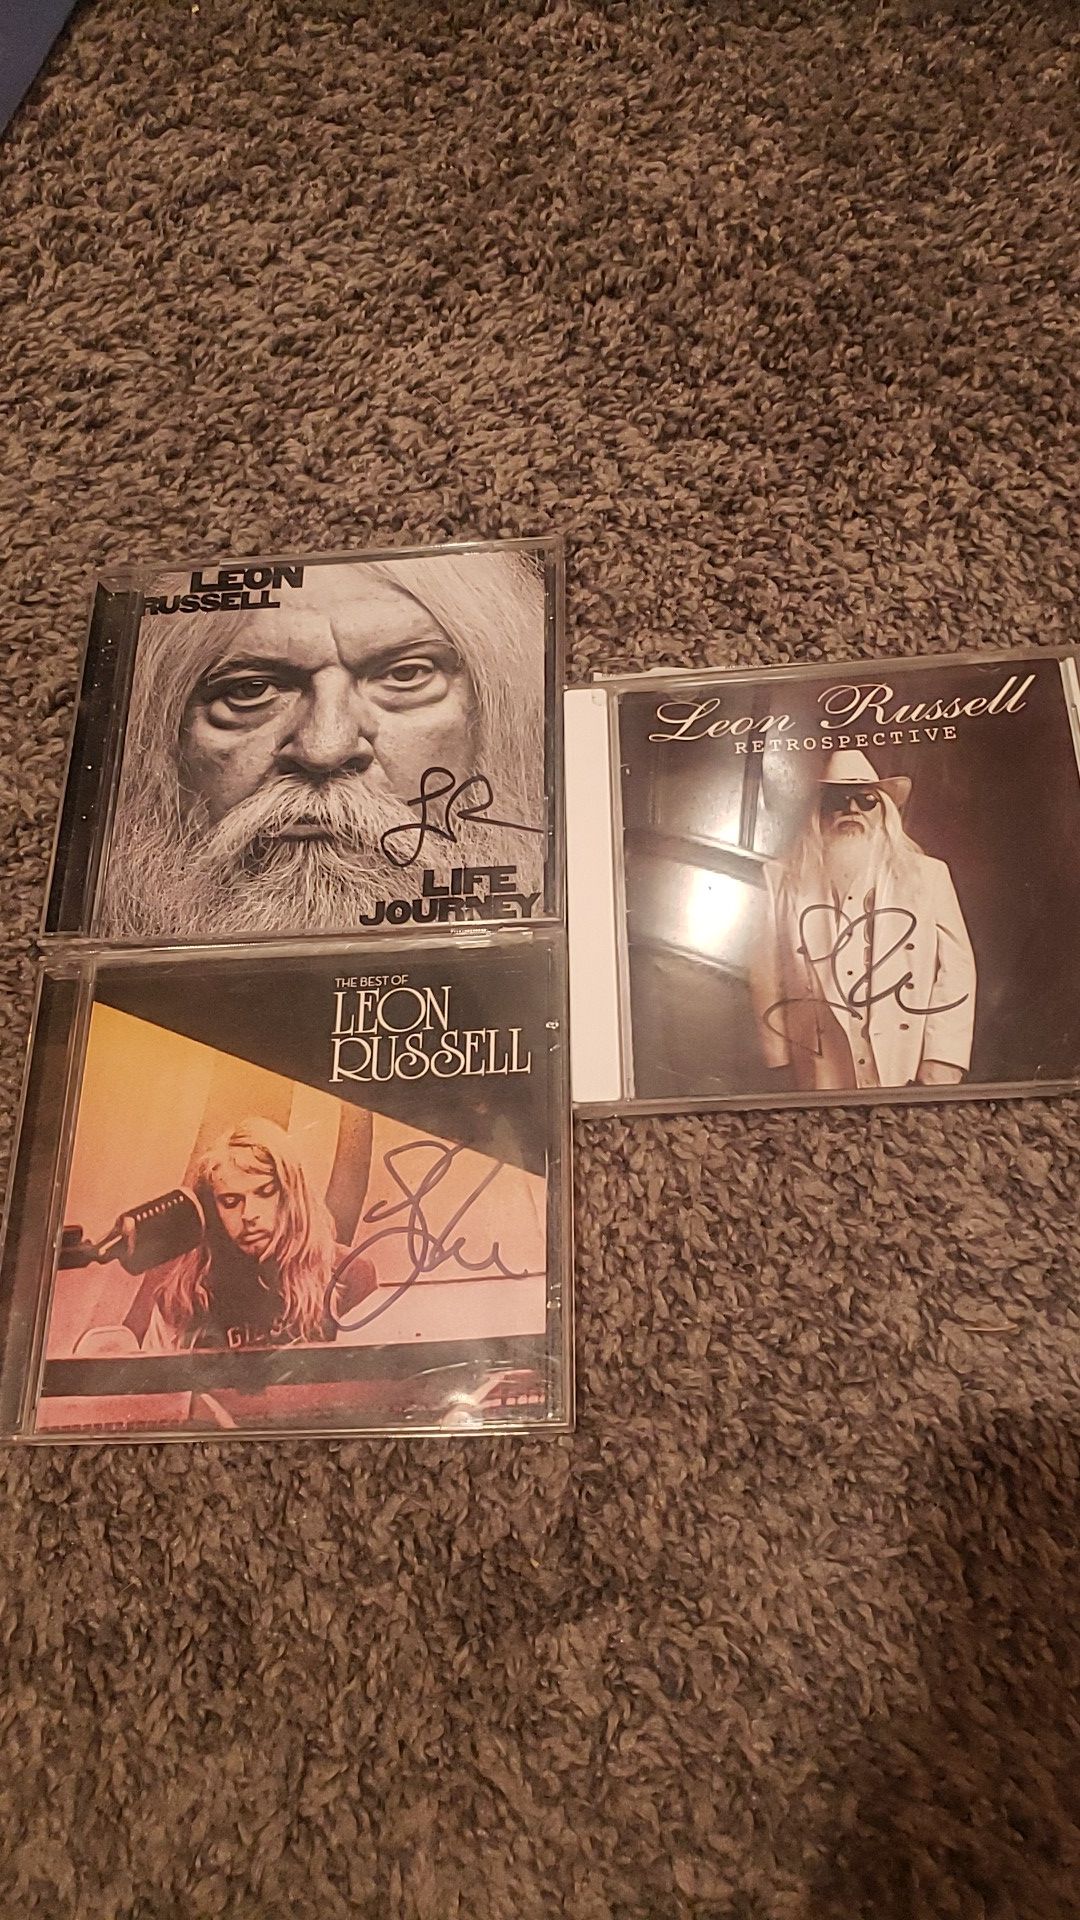 3 Signed Leon Russell CD's